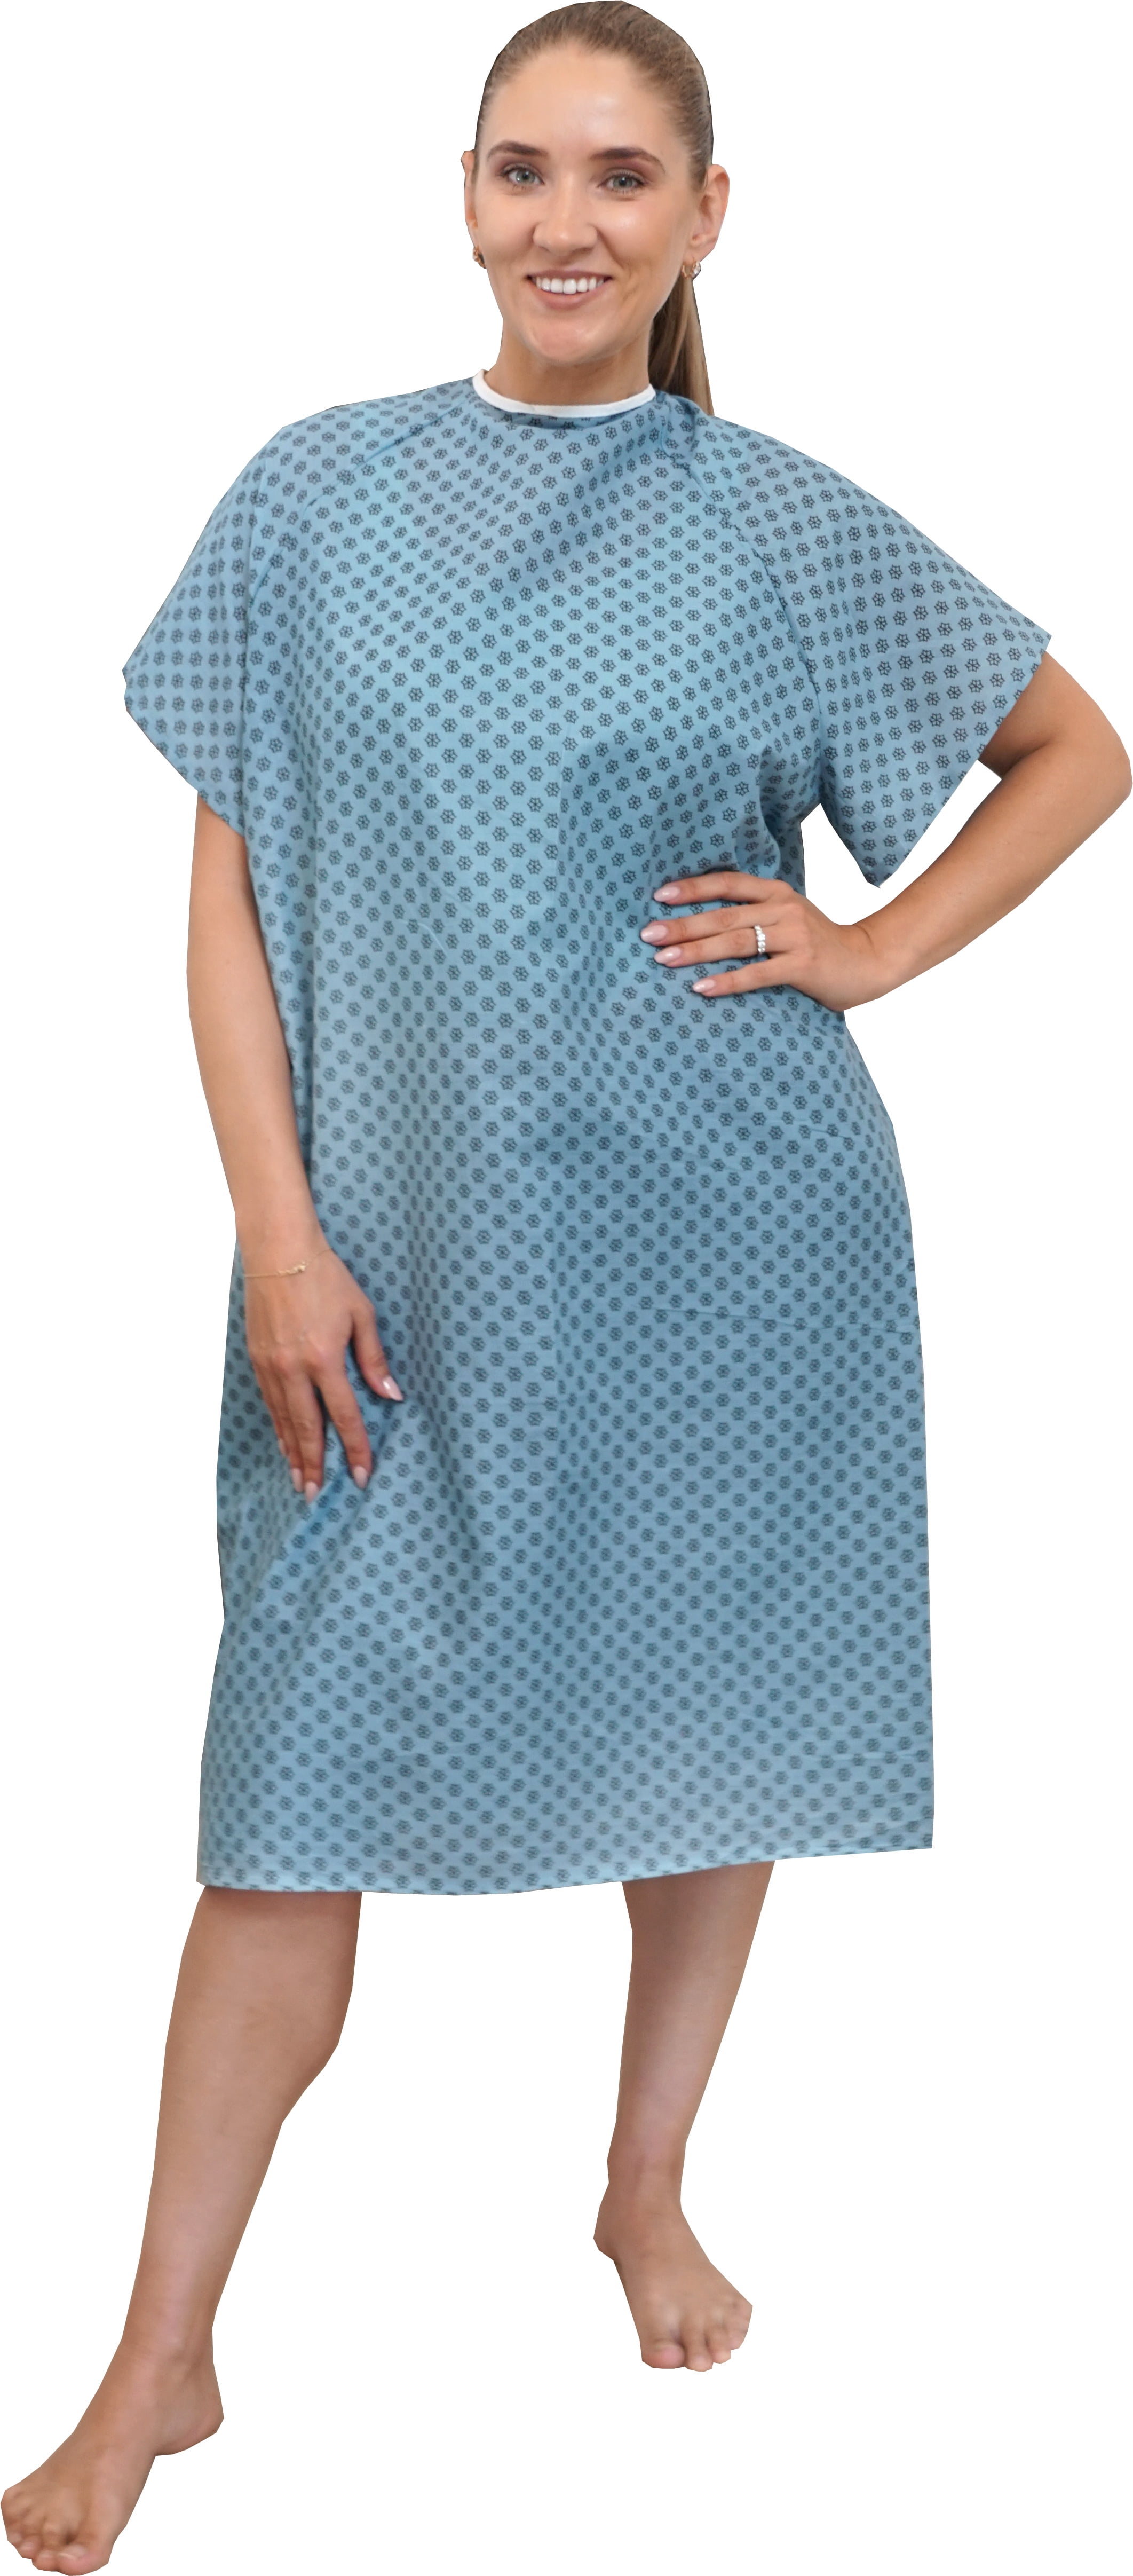 Elivo Ultra Soft Hospital Gown| One Size Fits All India | Ubuy